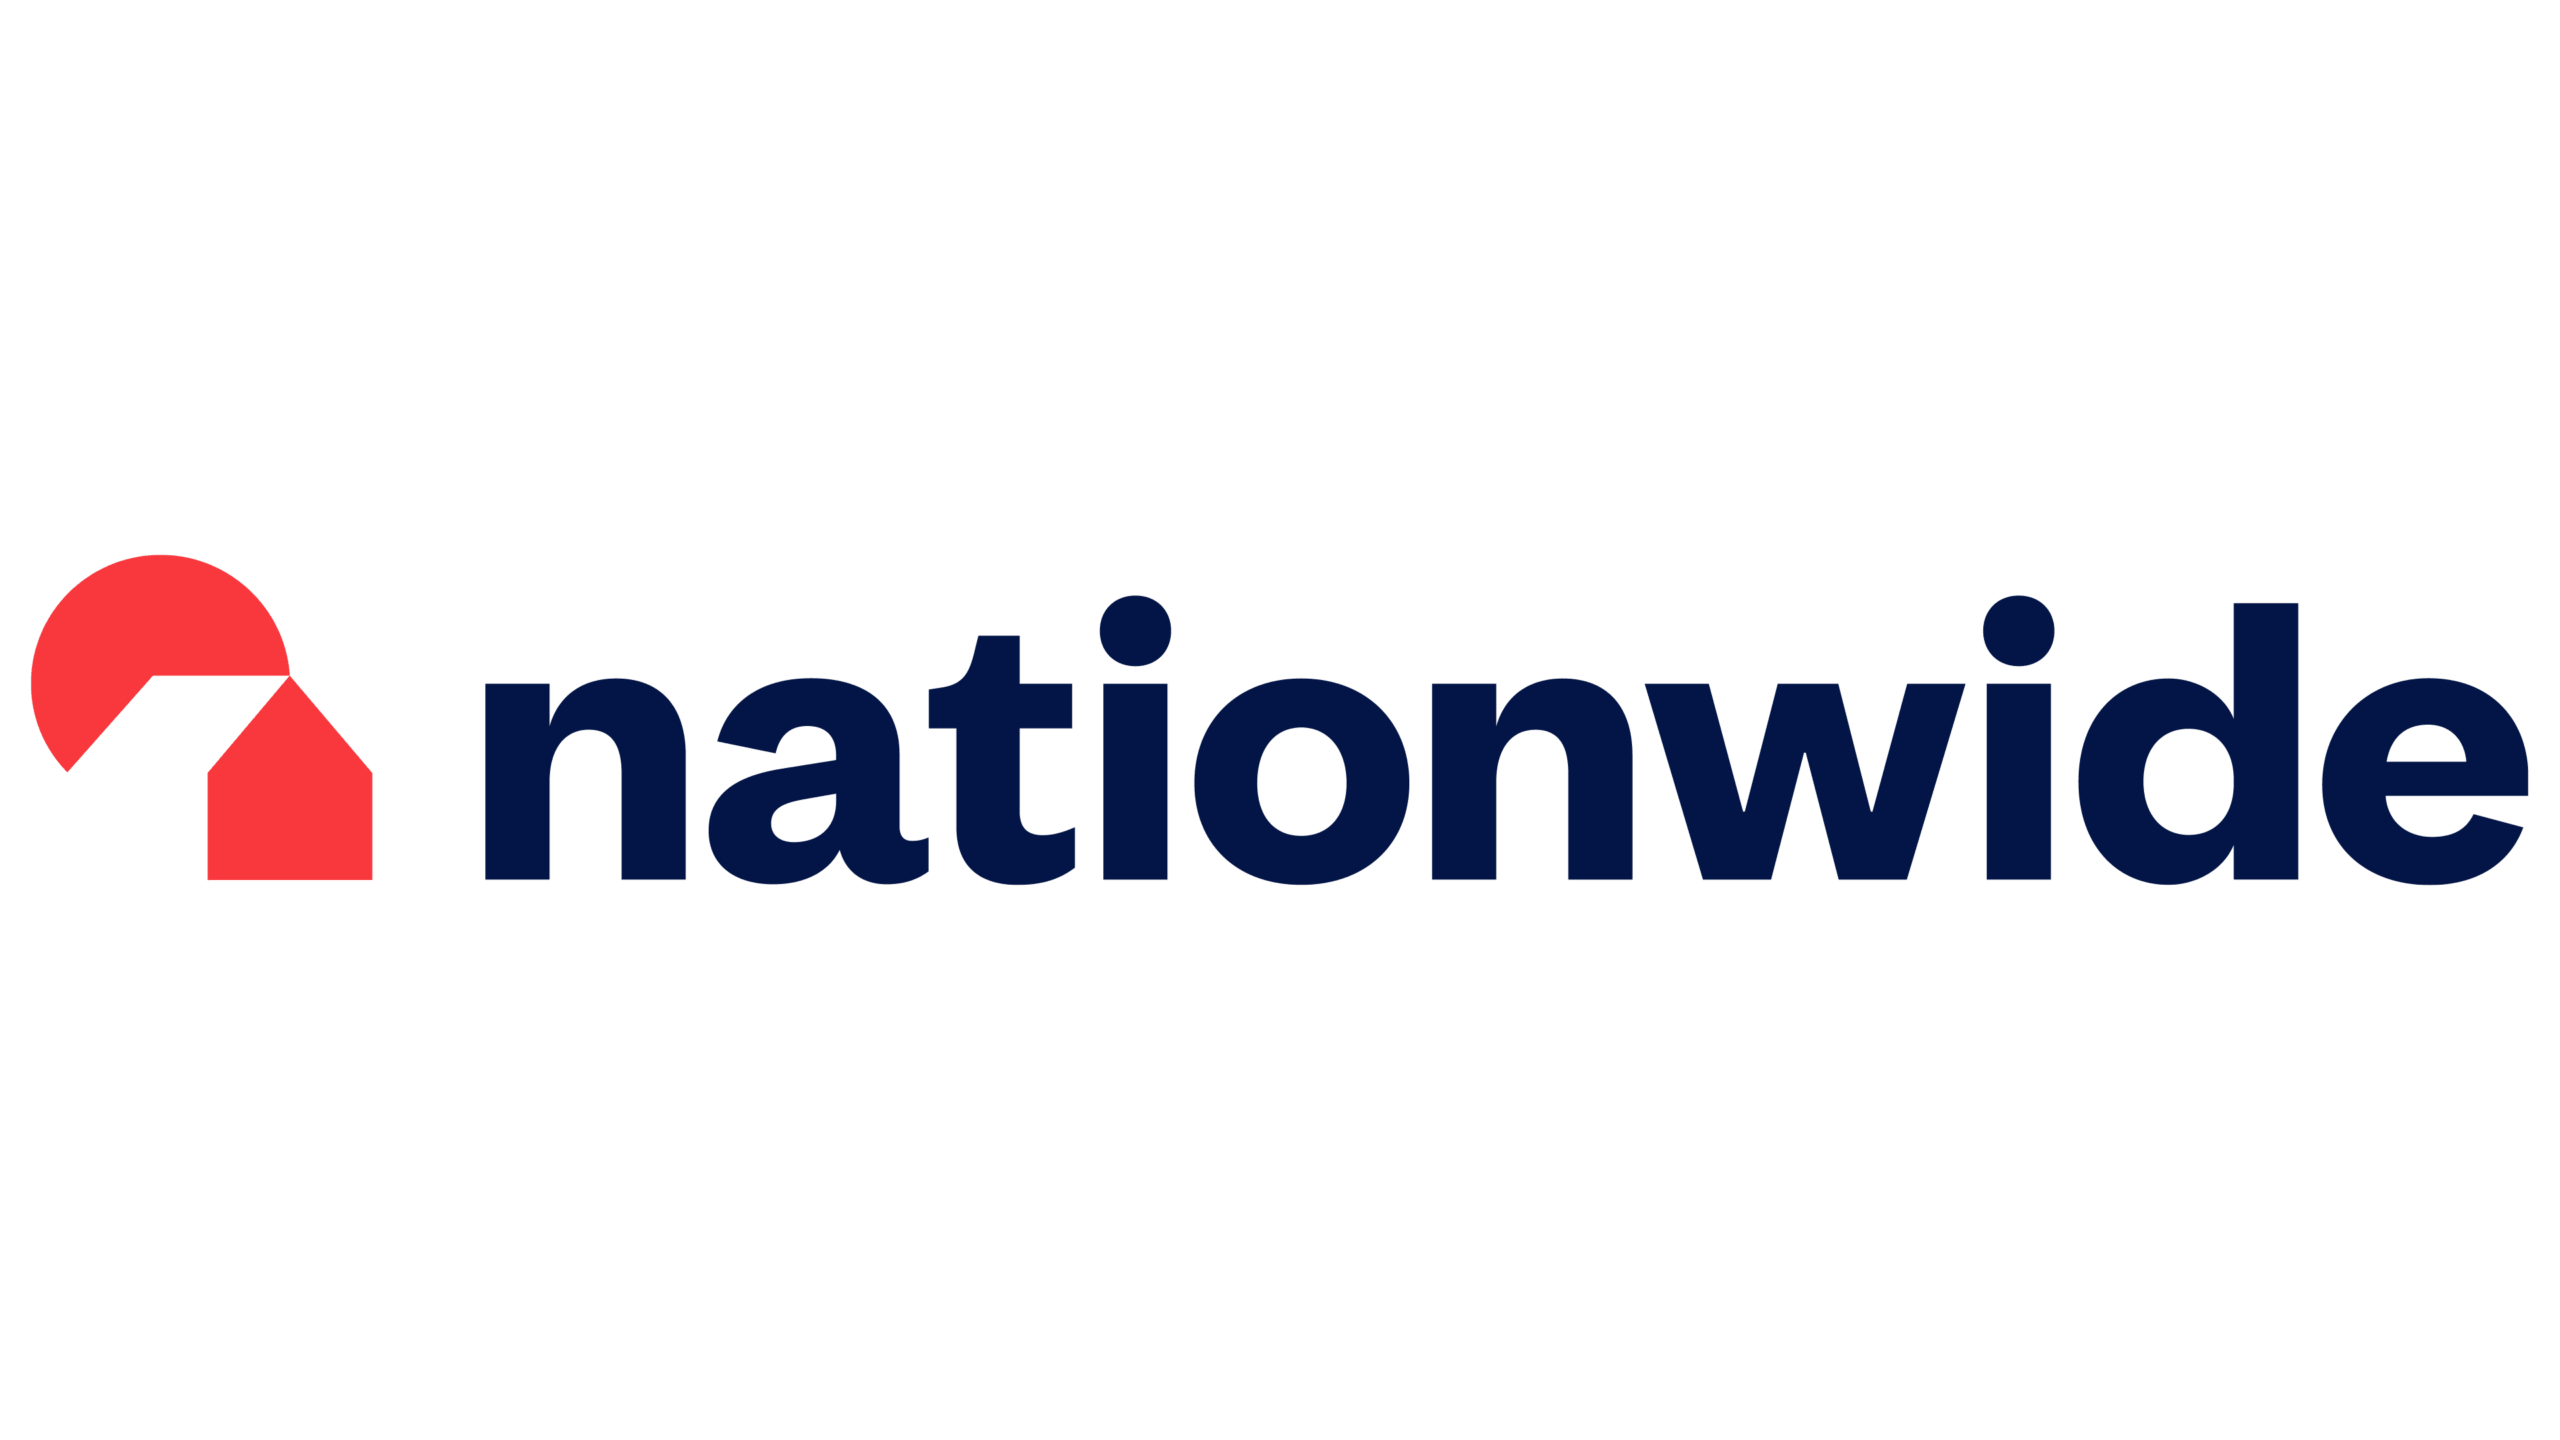 New Nationwide Logo | Nationwide Building Society Rebrand | What Is Rebranding